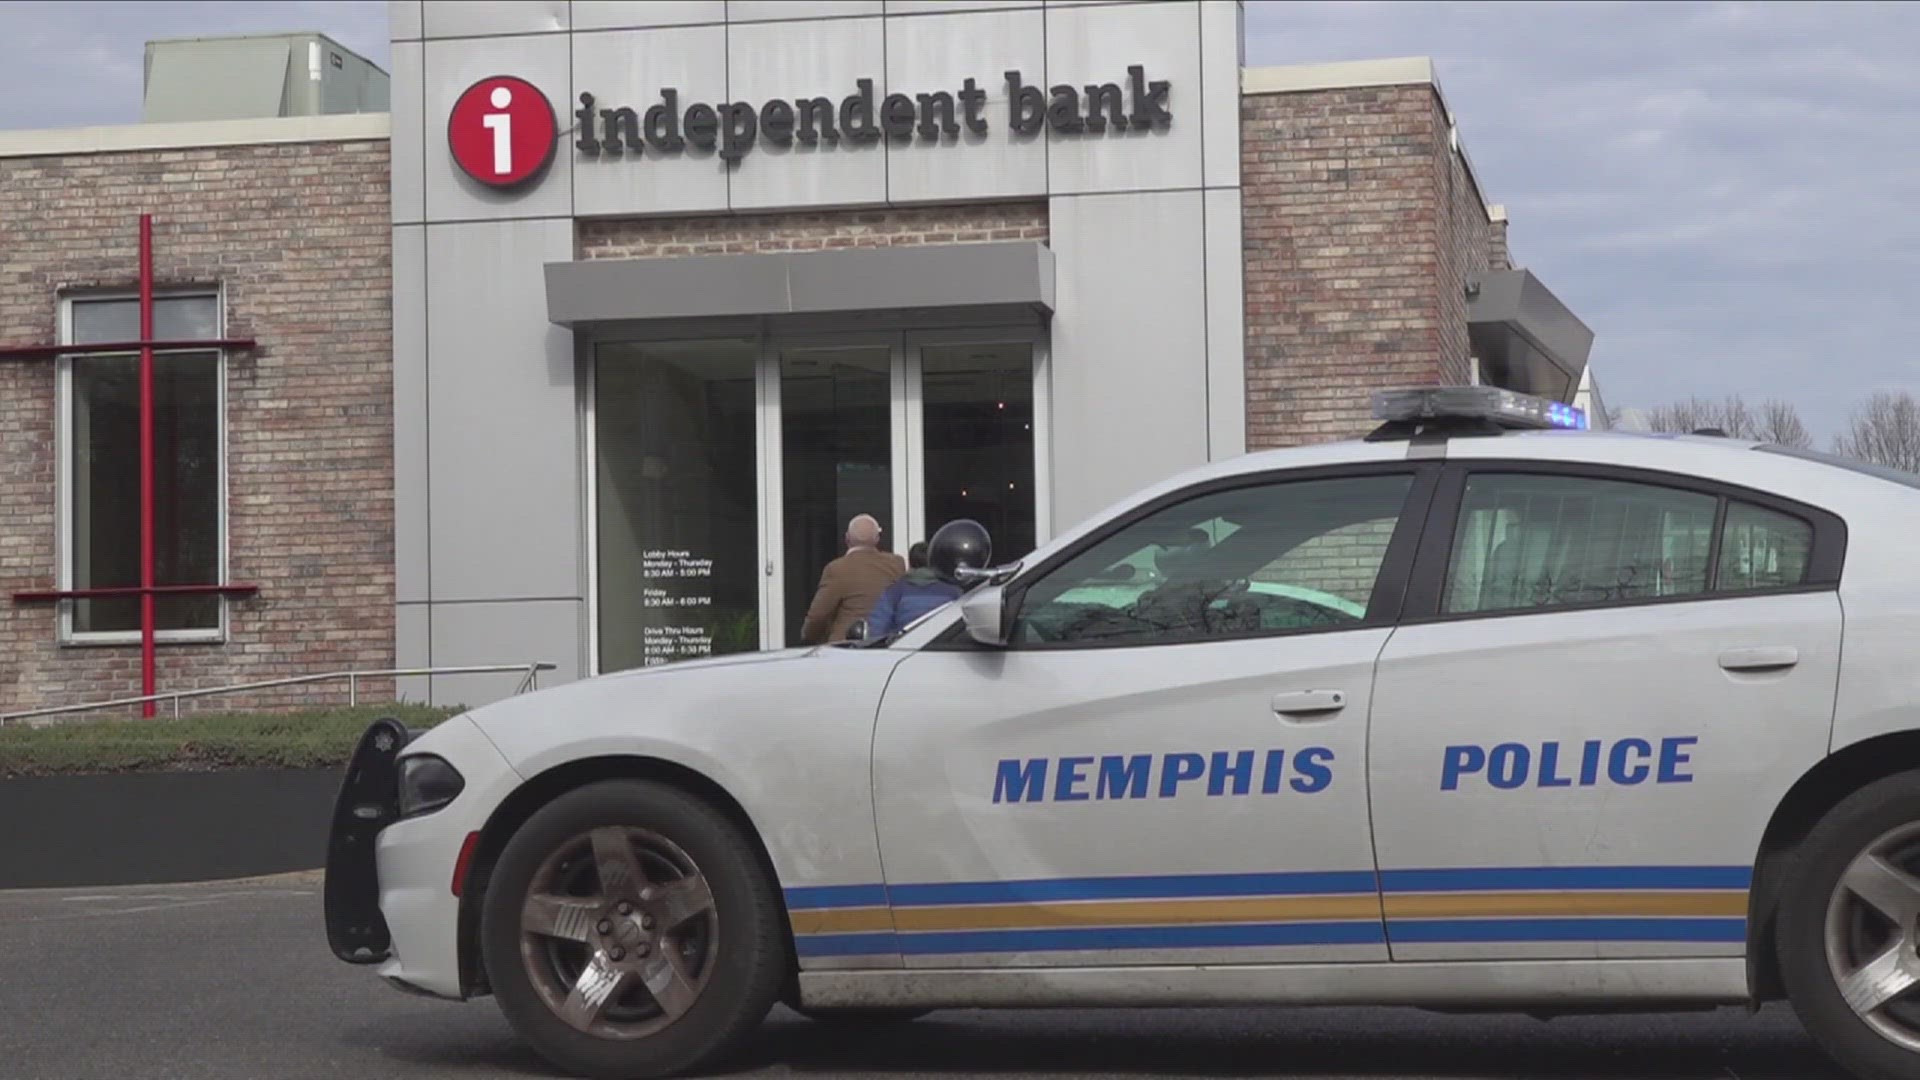 Two robbers targeted a bank Friday morning in Midtown on Union Avenue, according to MPD.